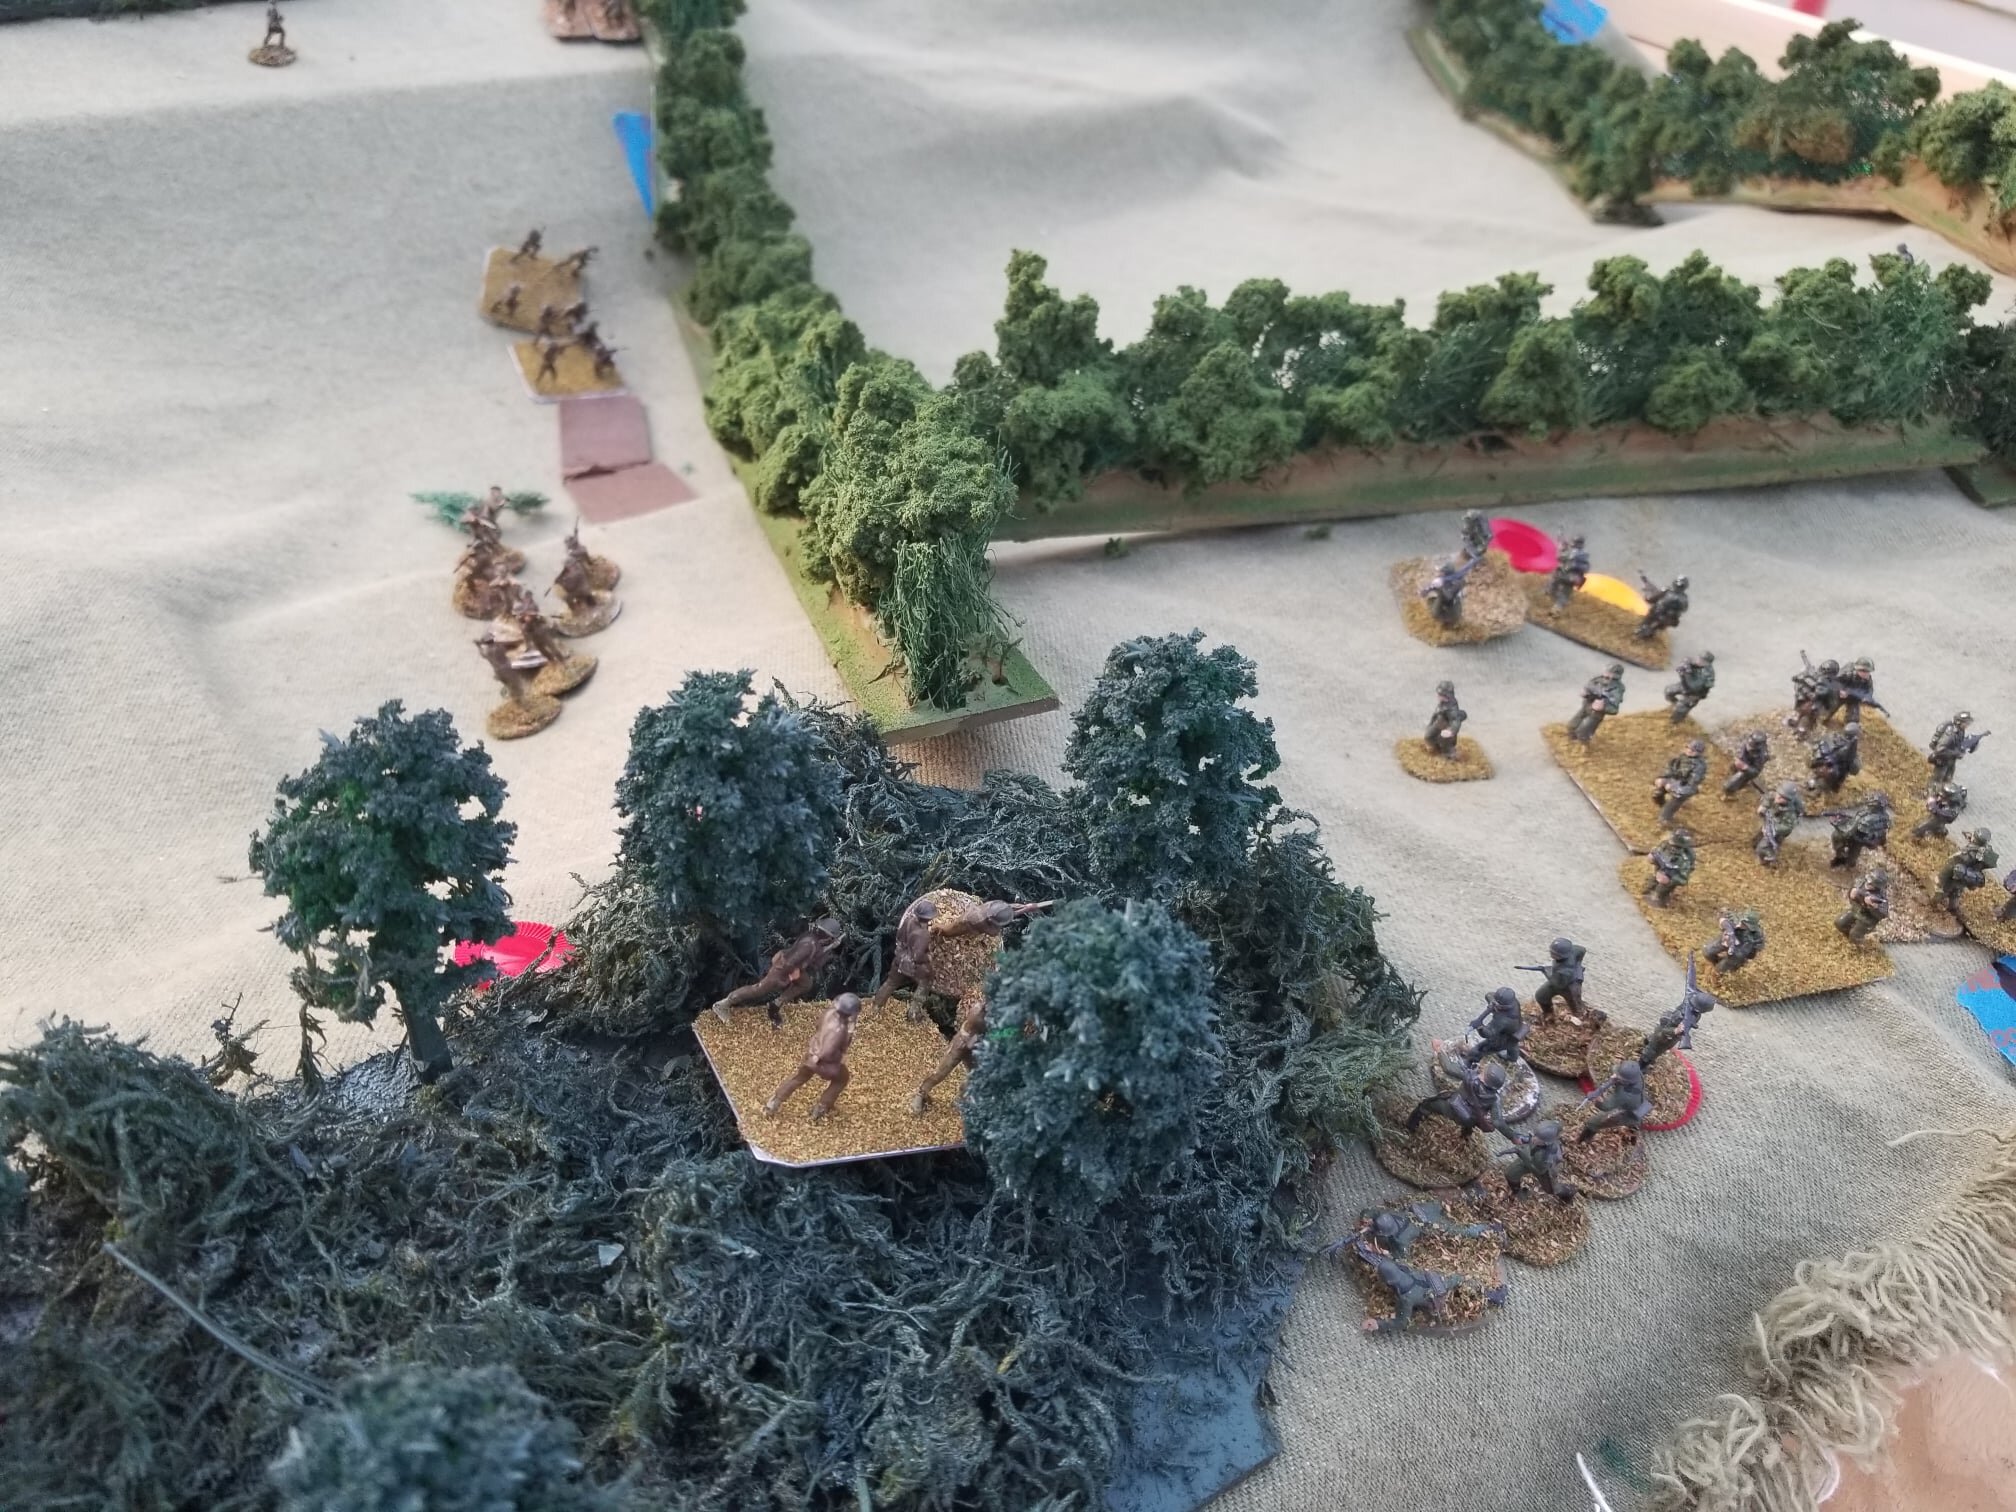  Two Polish squads try to hold back the Panzergrenadiers but there are too many of them. 